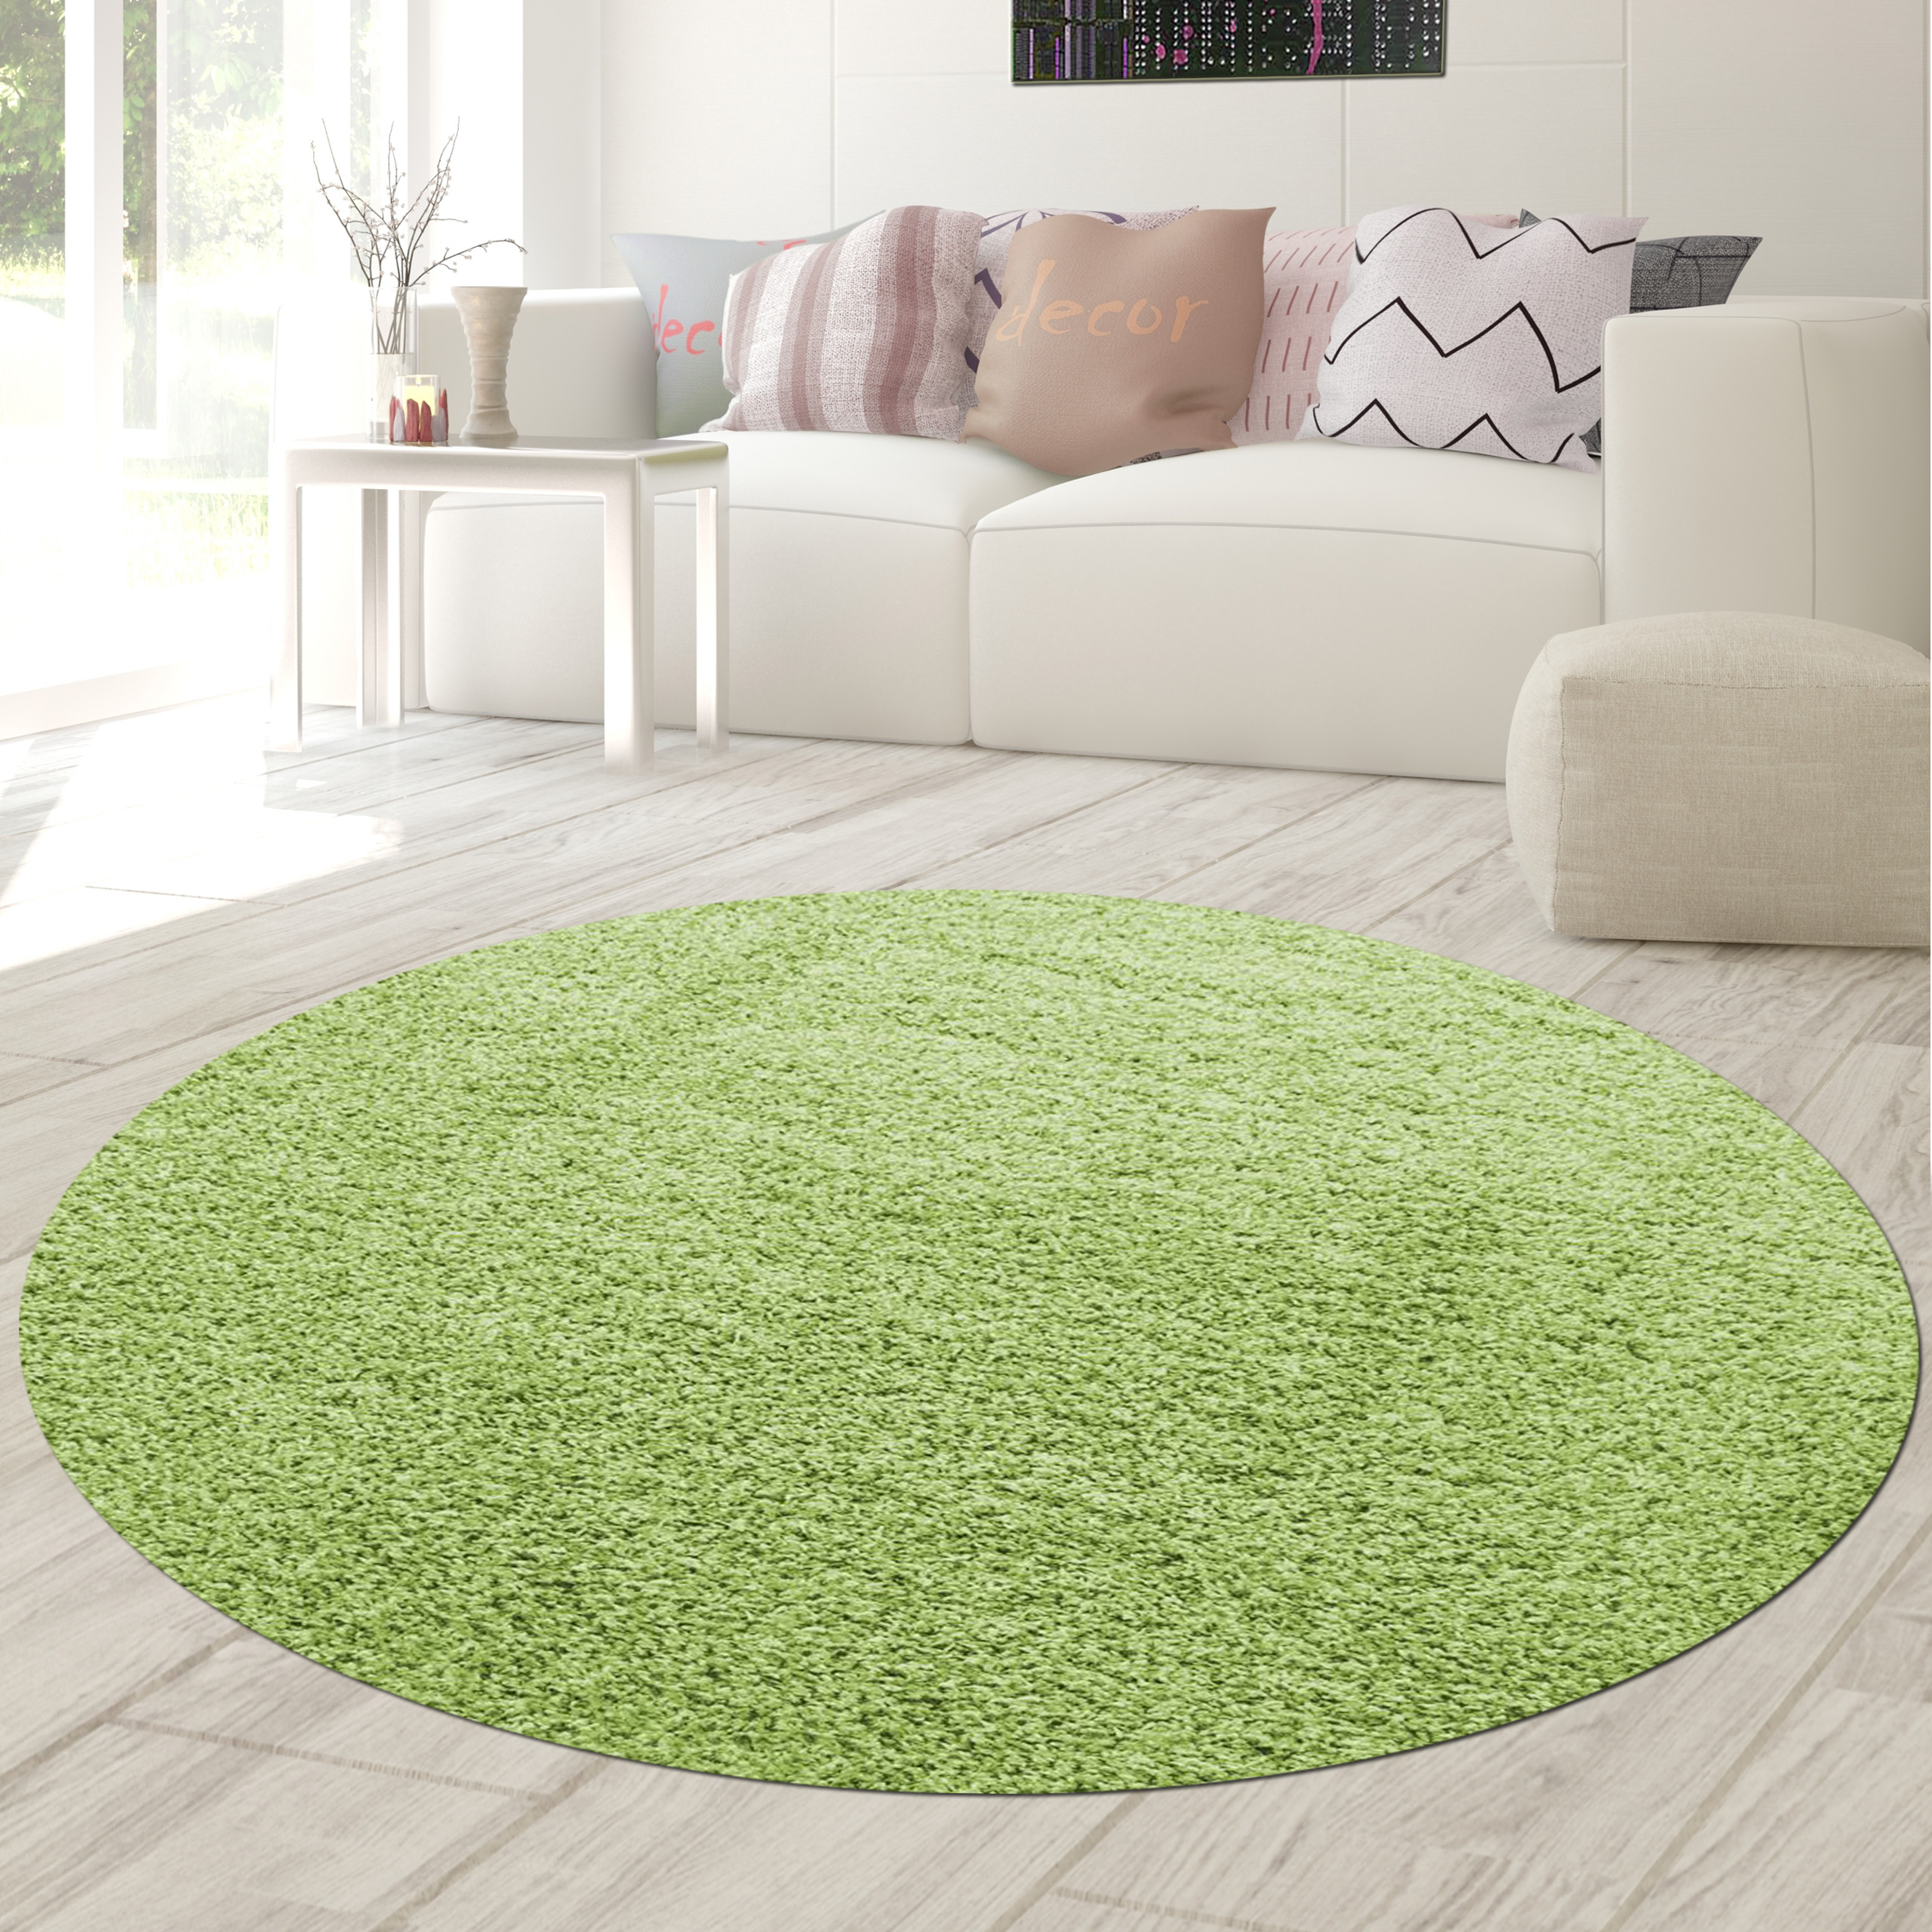 Shag carpet emission free 2.2 gr / m² Total weight (approx) 30mm overall  height (approx) 100% Merilon frisee, polypropylenes - Teppich-Traum